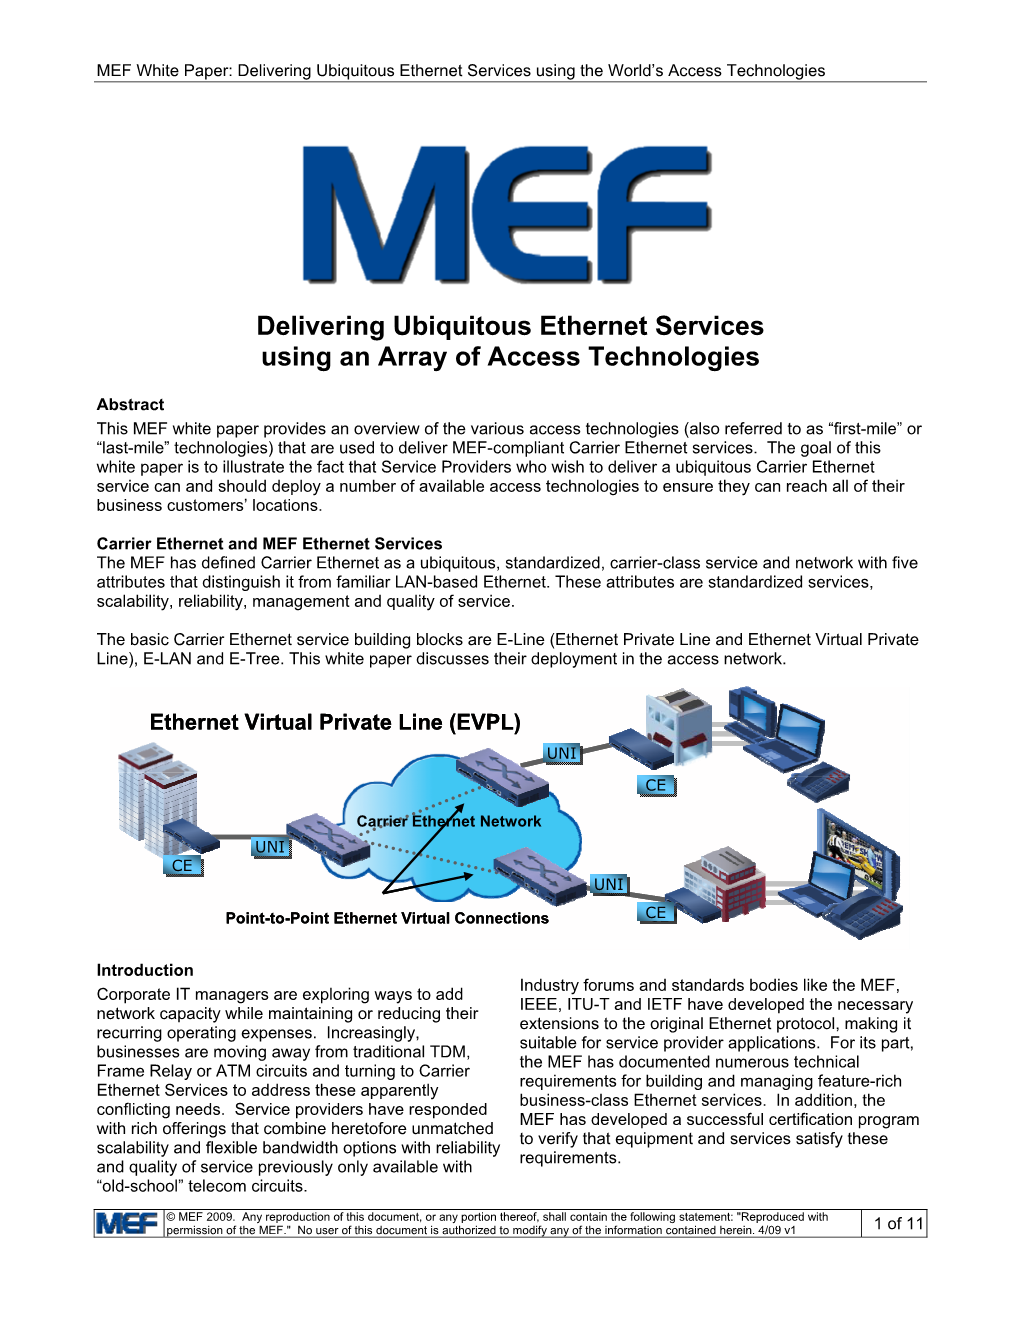 Delivering Ubiquitous Ethernet Services Using the World’S Access Technologies